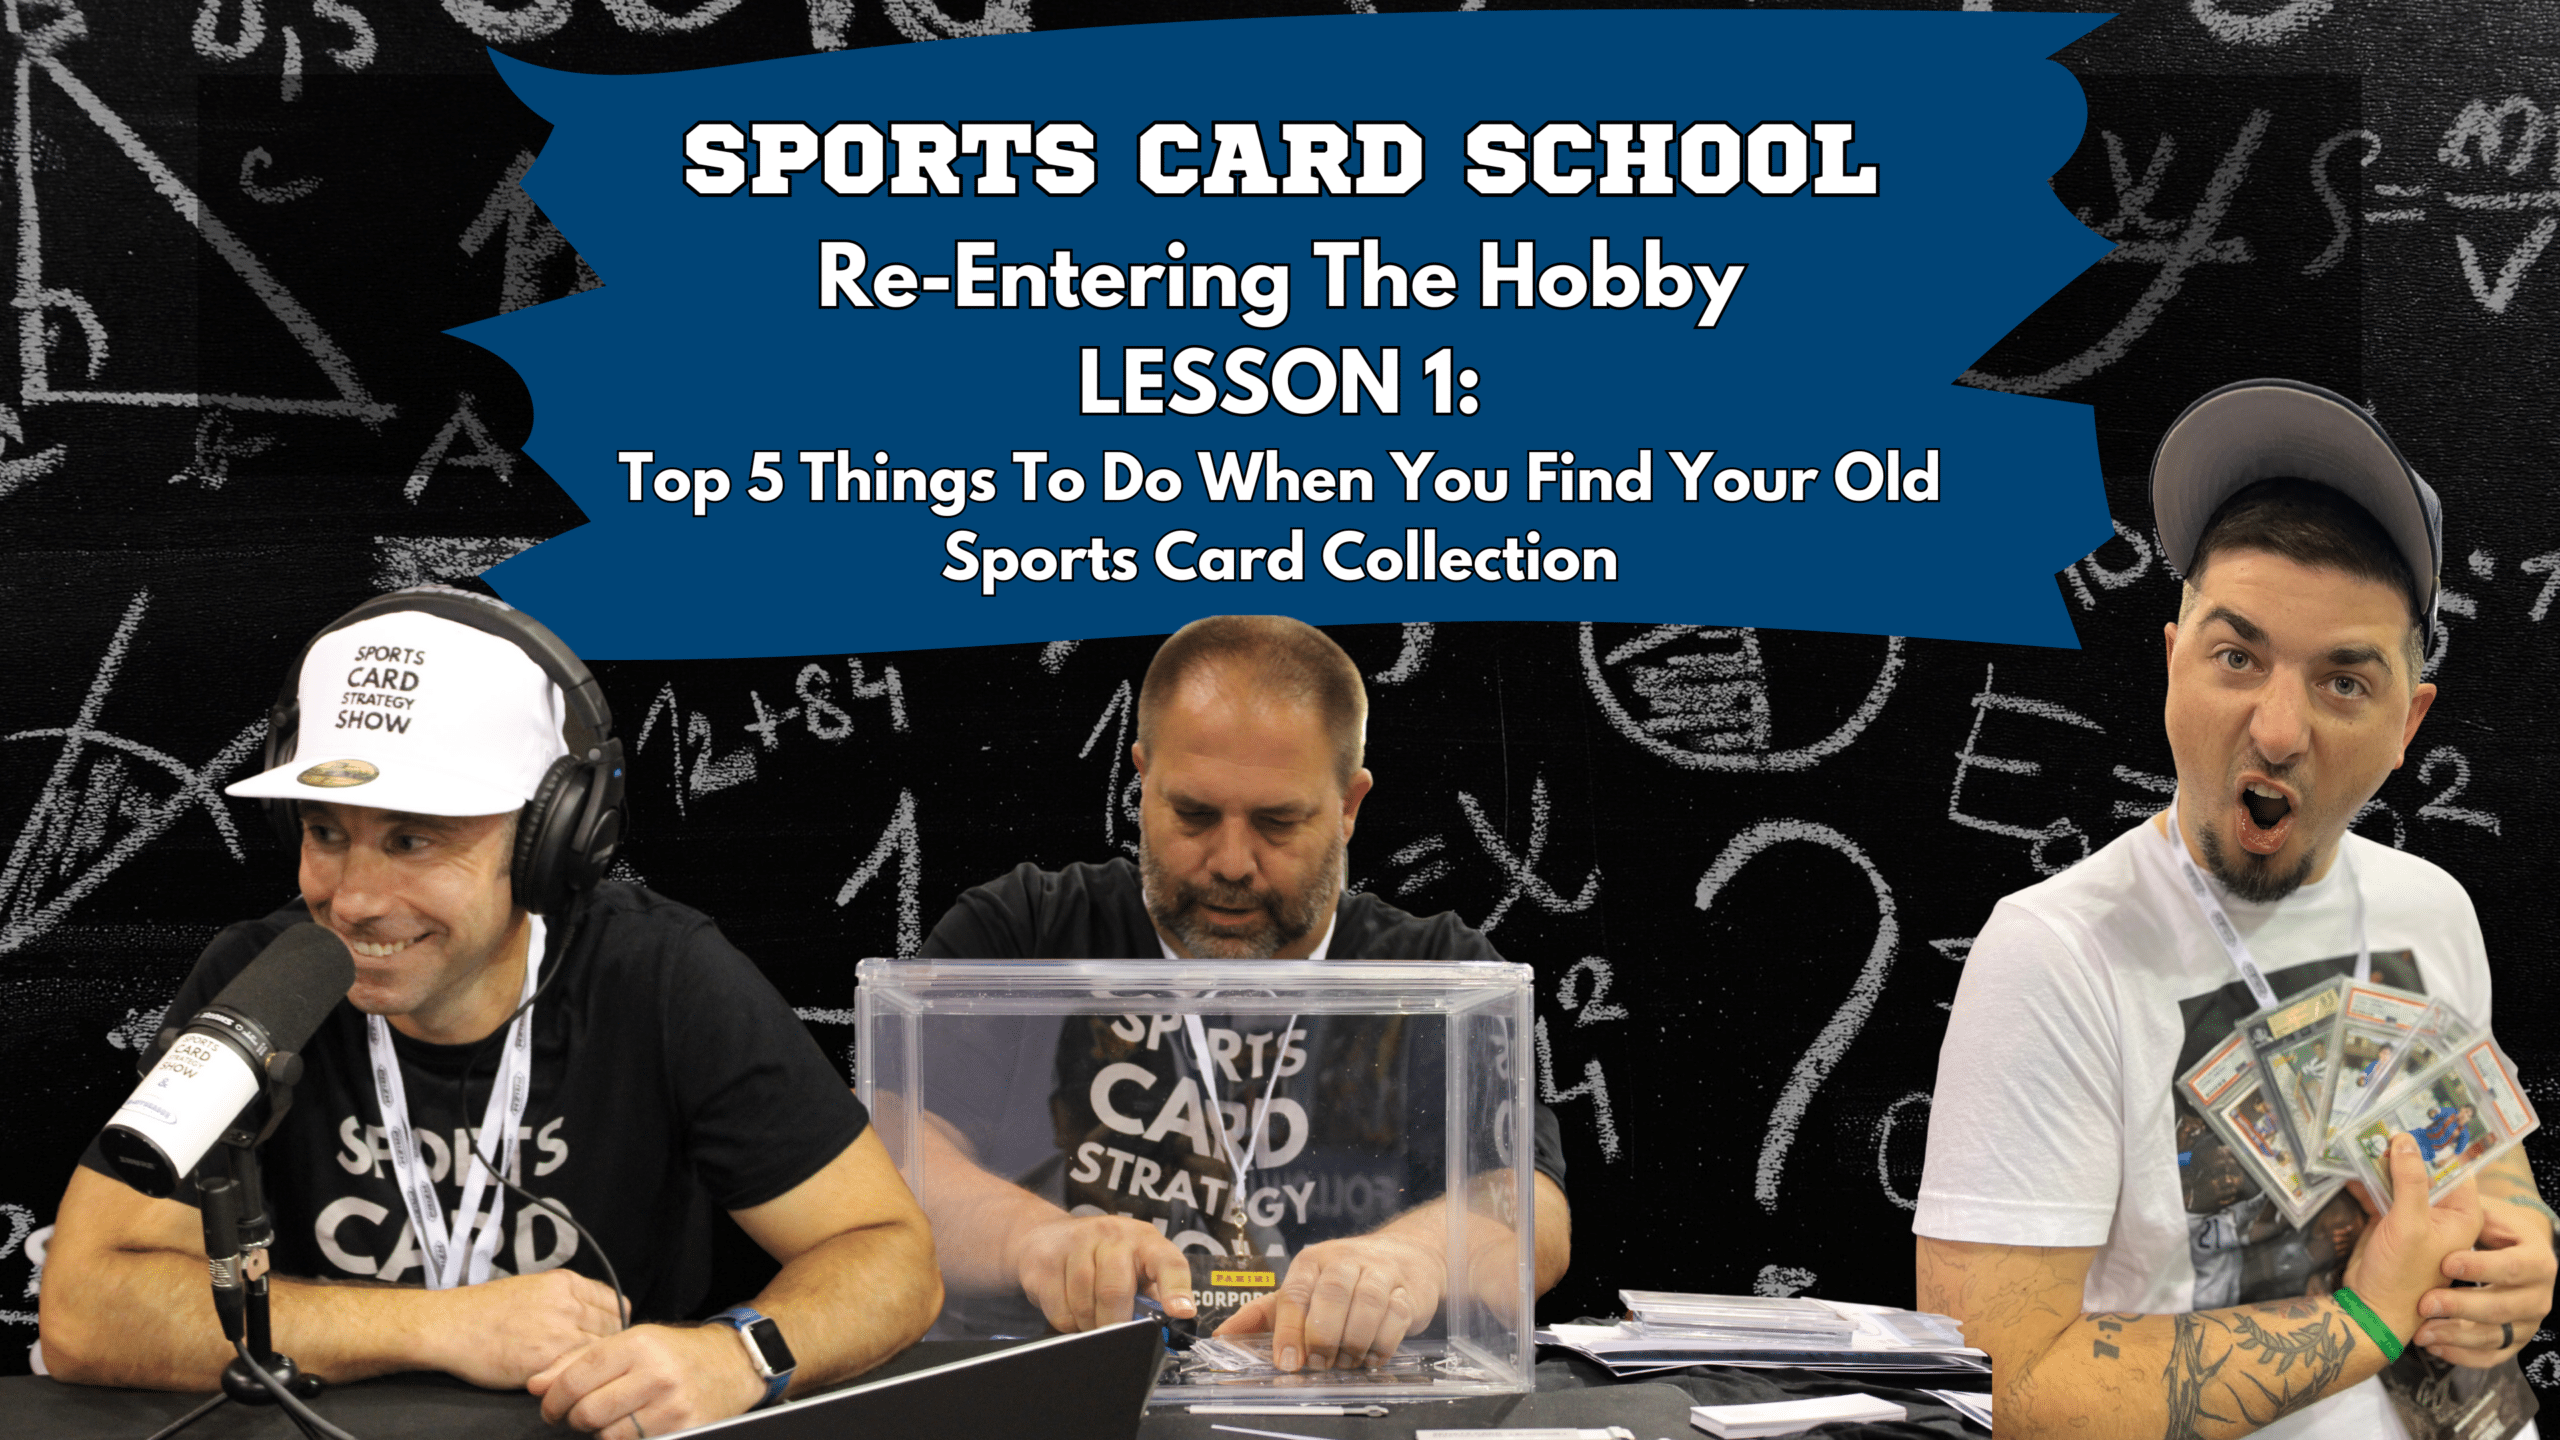 1 Top 5 Things To Do When You Find Your Old Sports Card Collection